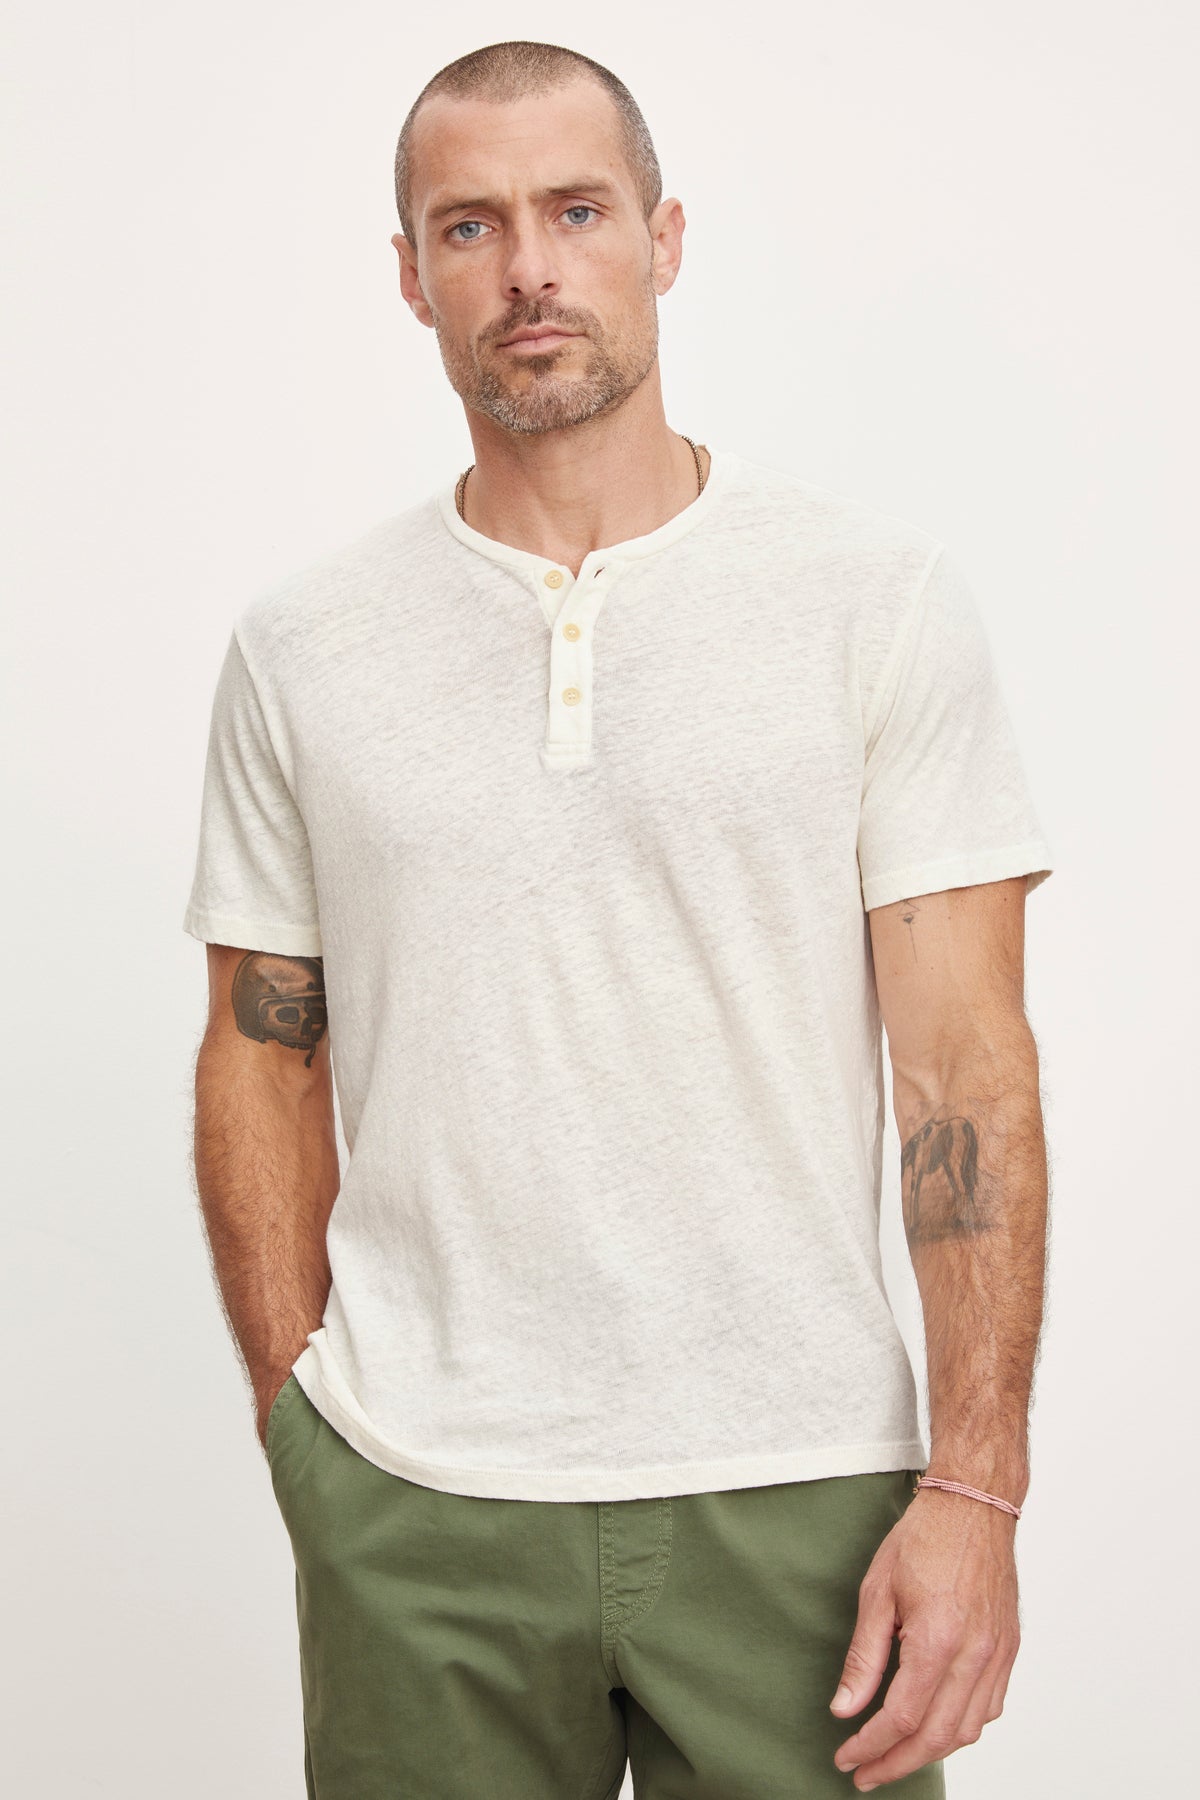 A man with a short beard and tattoos on his arms wearing a Velvet by Graham & Spencer Lionel Henley style shirt and olive green pants, standing against a white background.-36753588682945